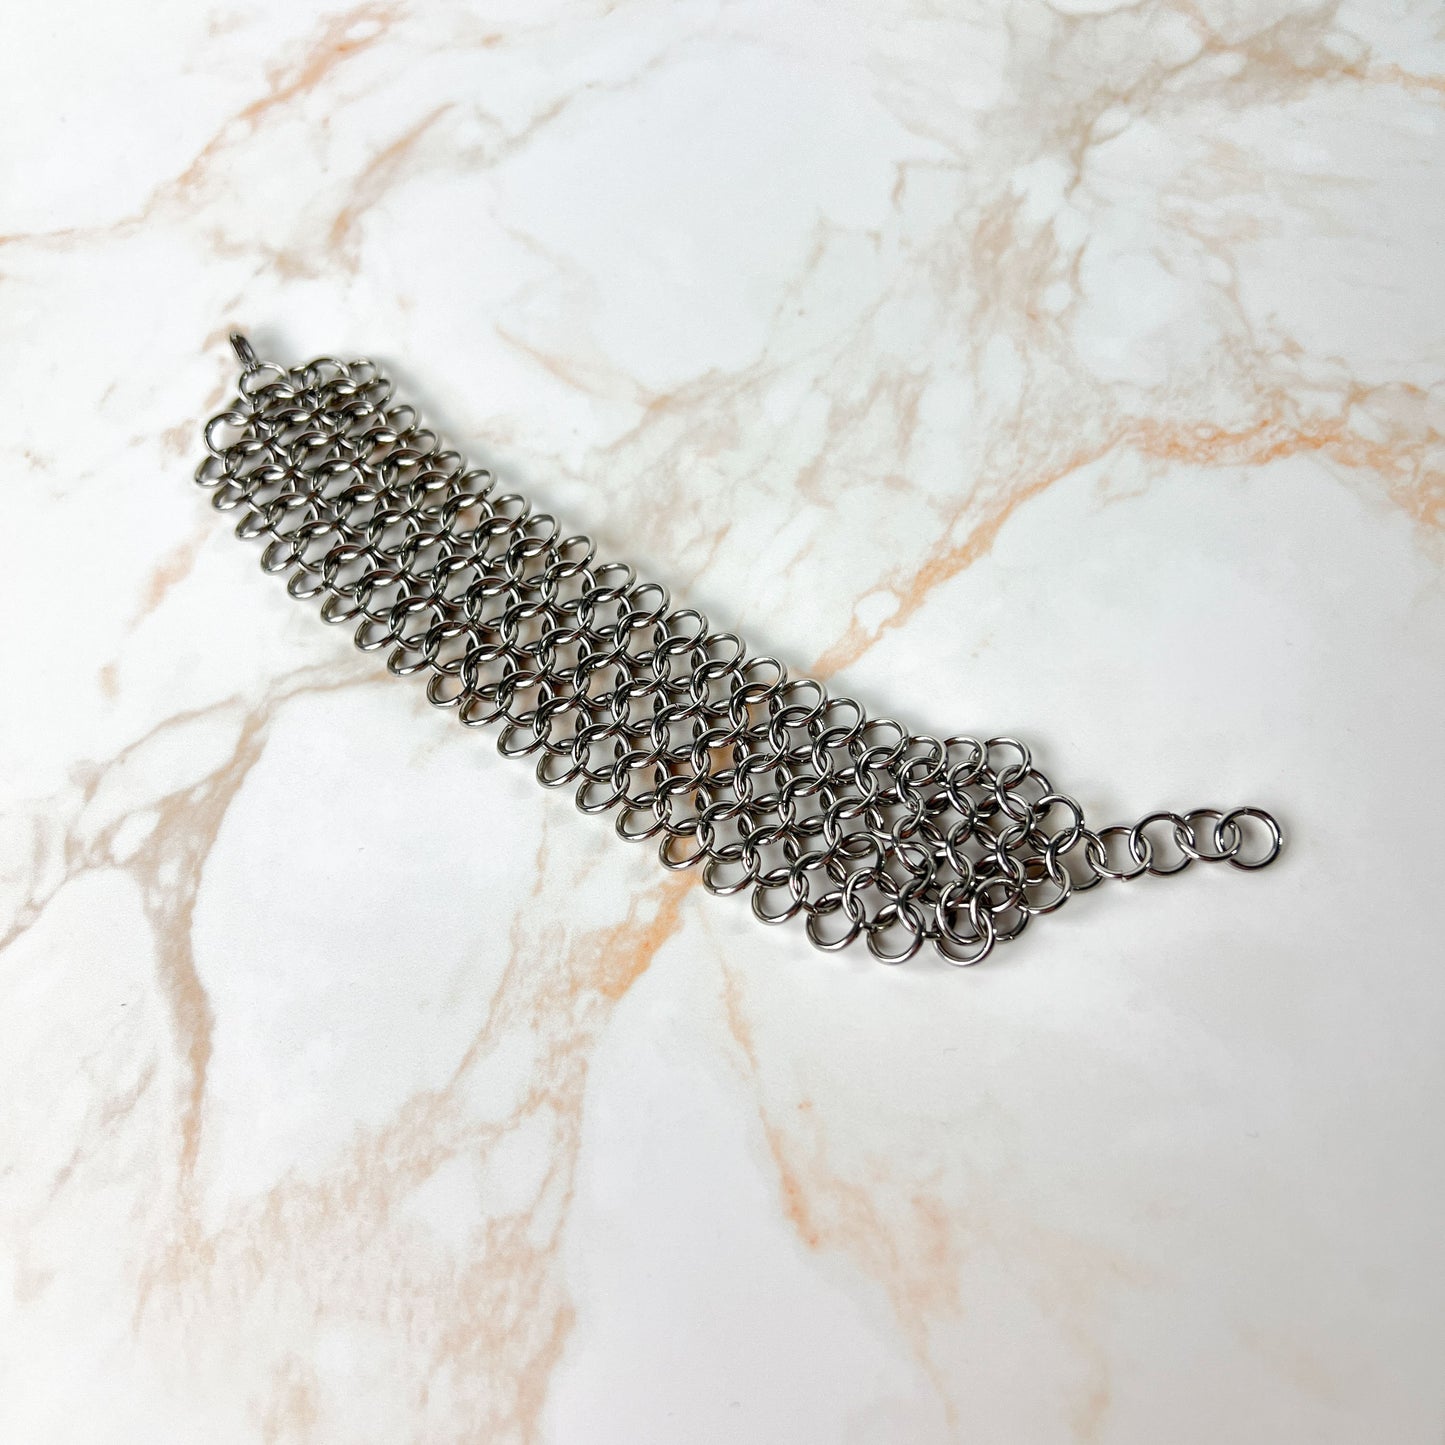 Chainmail bracelet European 4 in 1 stainless steel cuff